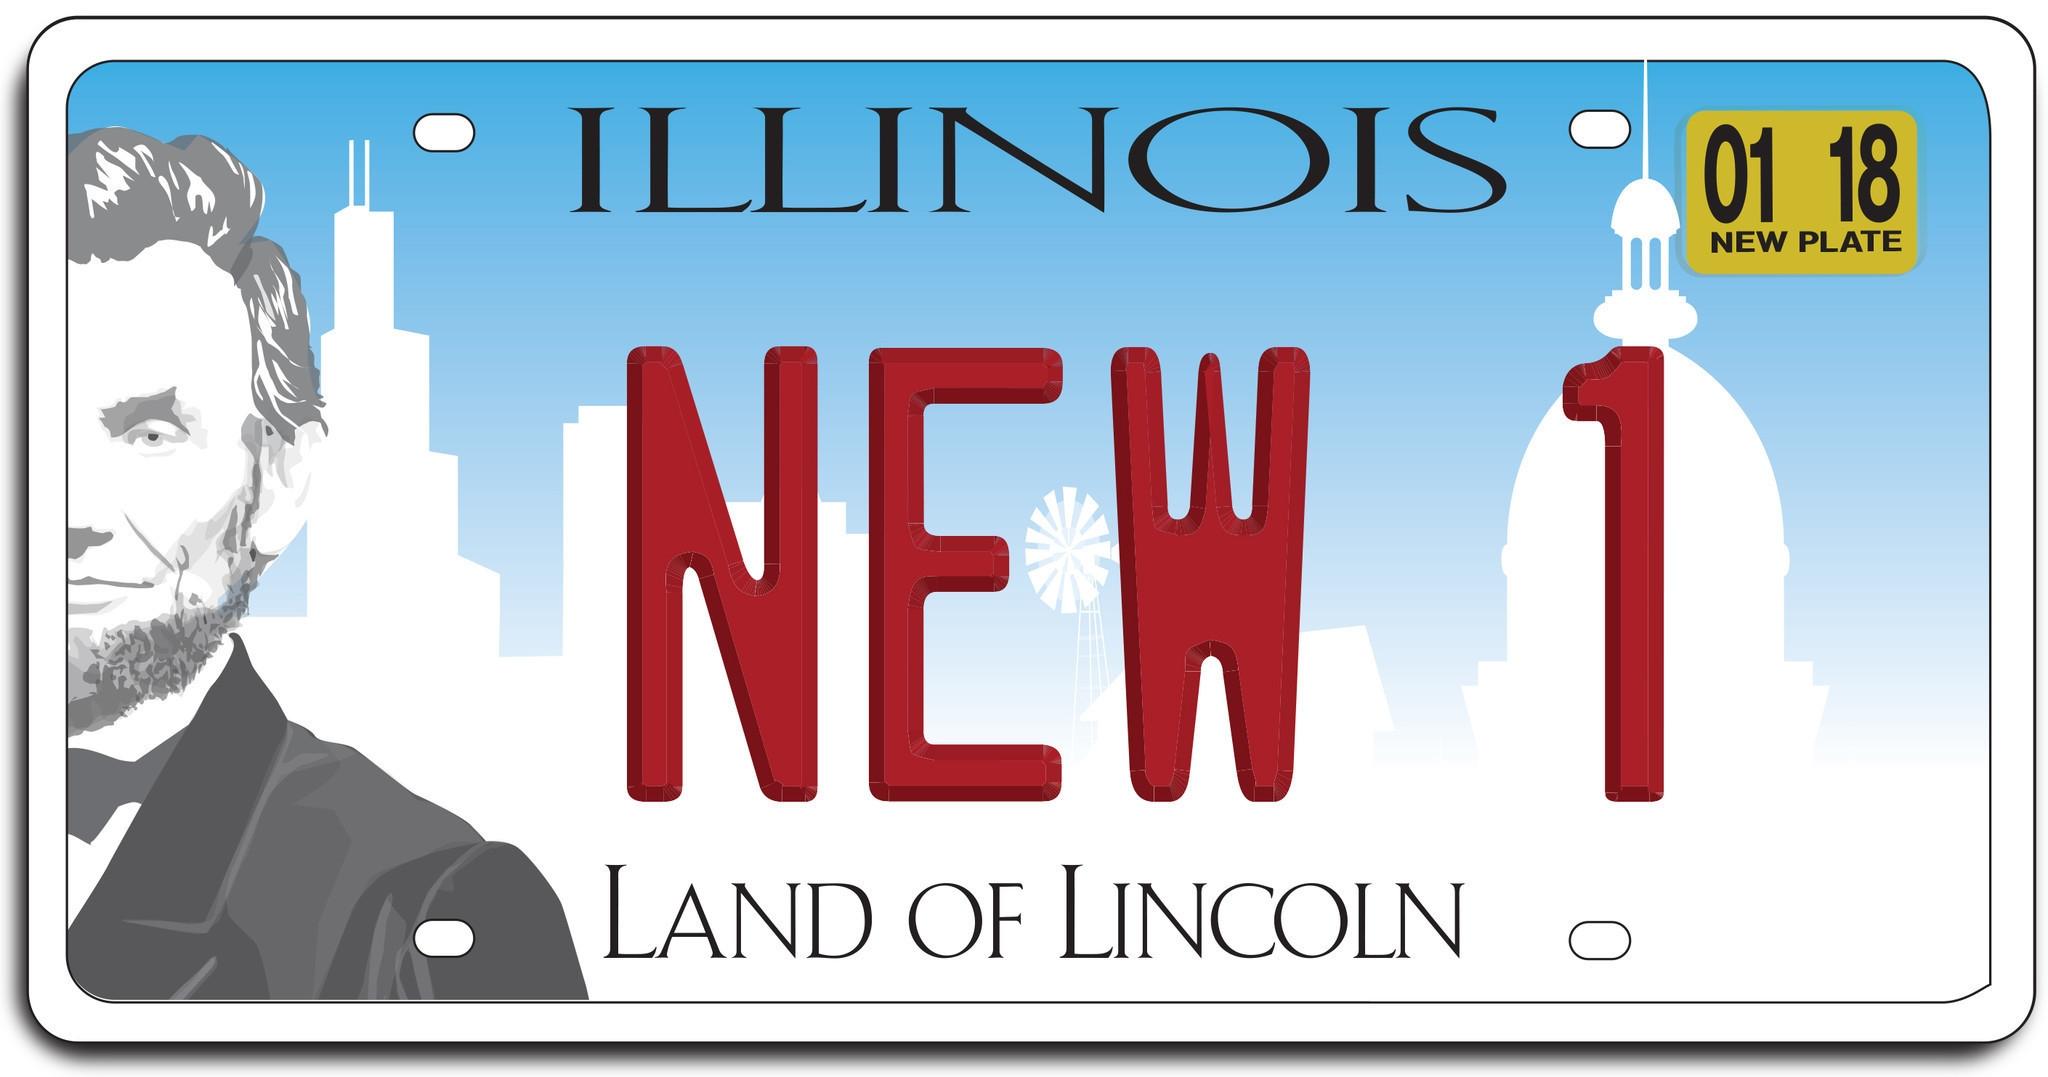 license plate with images of Lincoln, and silhouettes of the state capitol, and the Chicago skyline